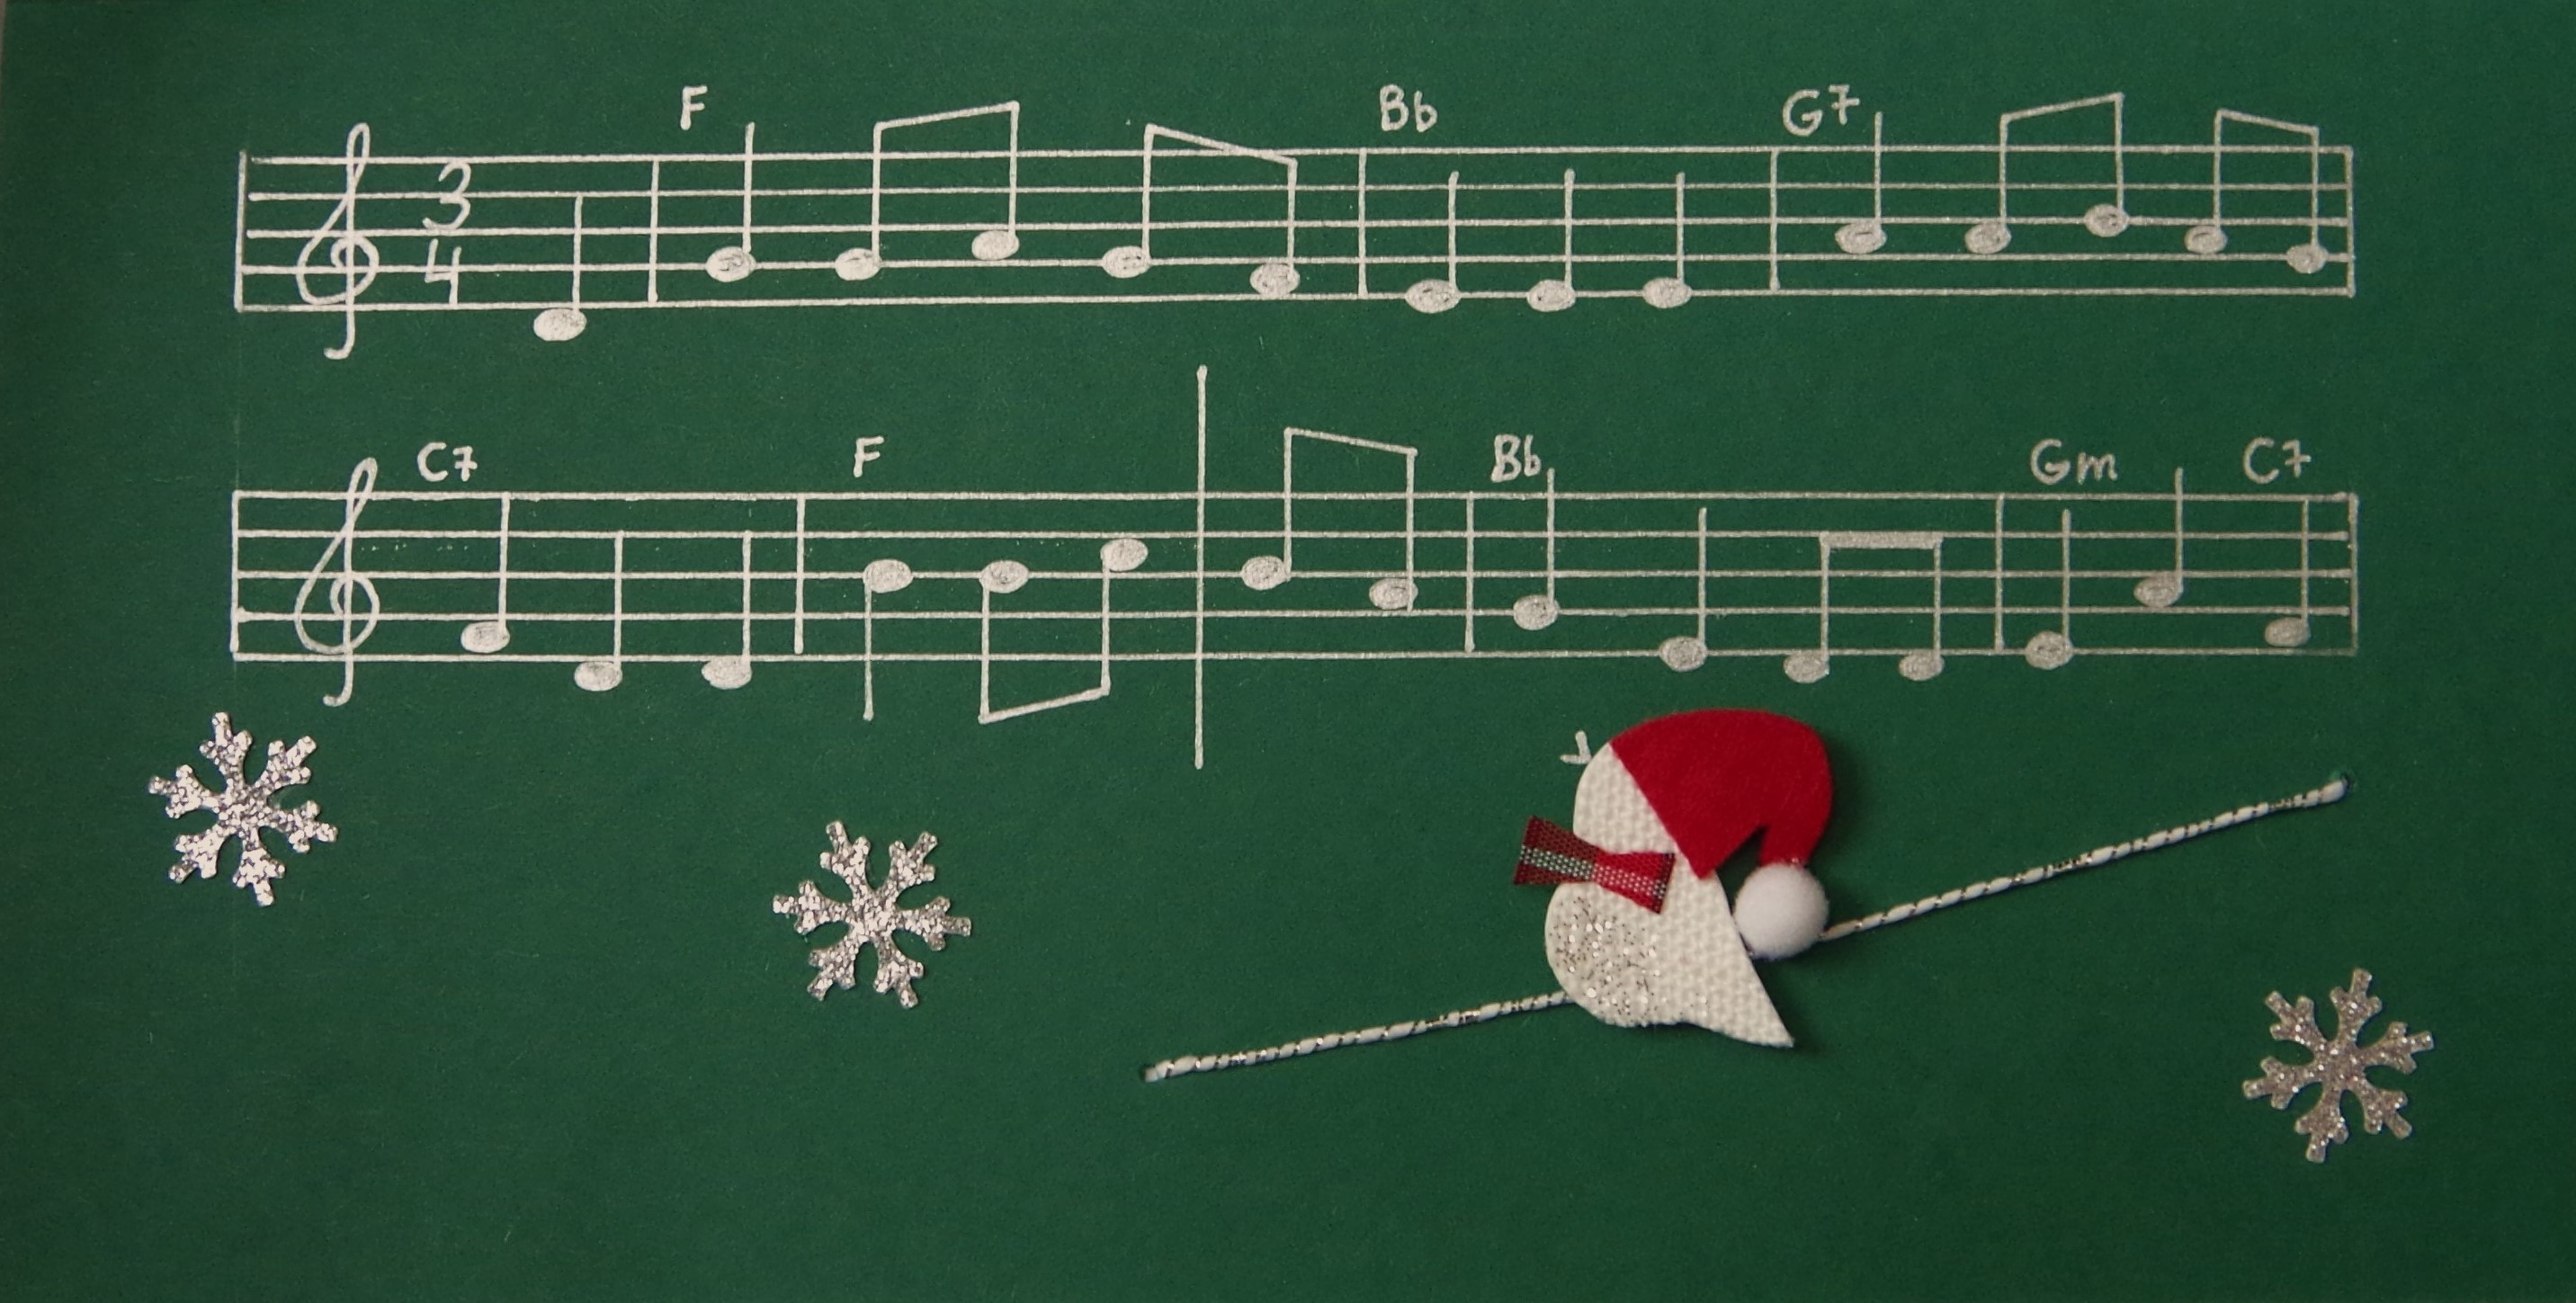 I wish you a Merry Christmas and a Happy New Year! For those who can read music:).